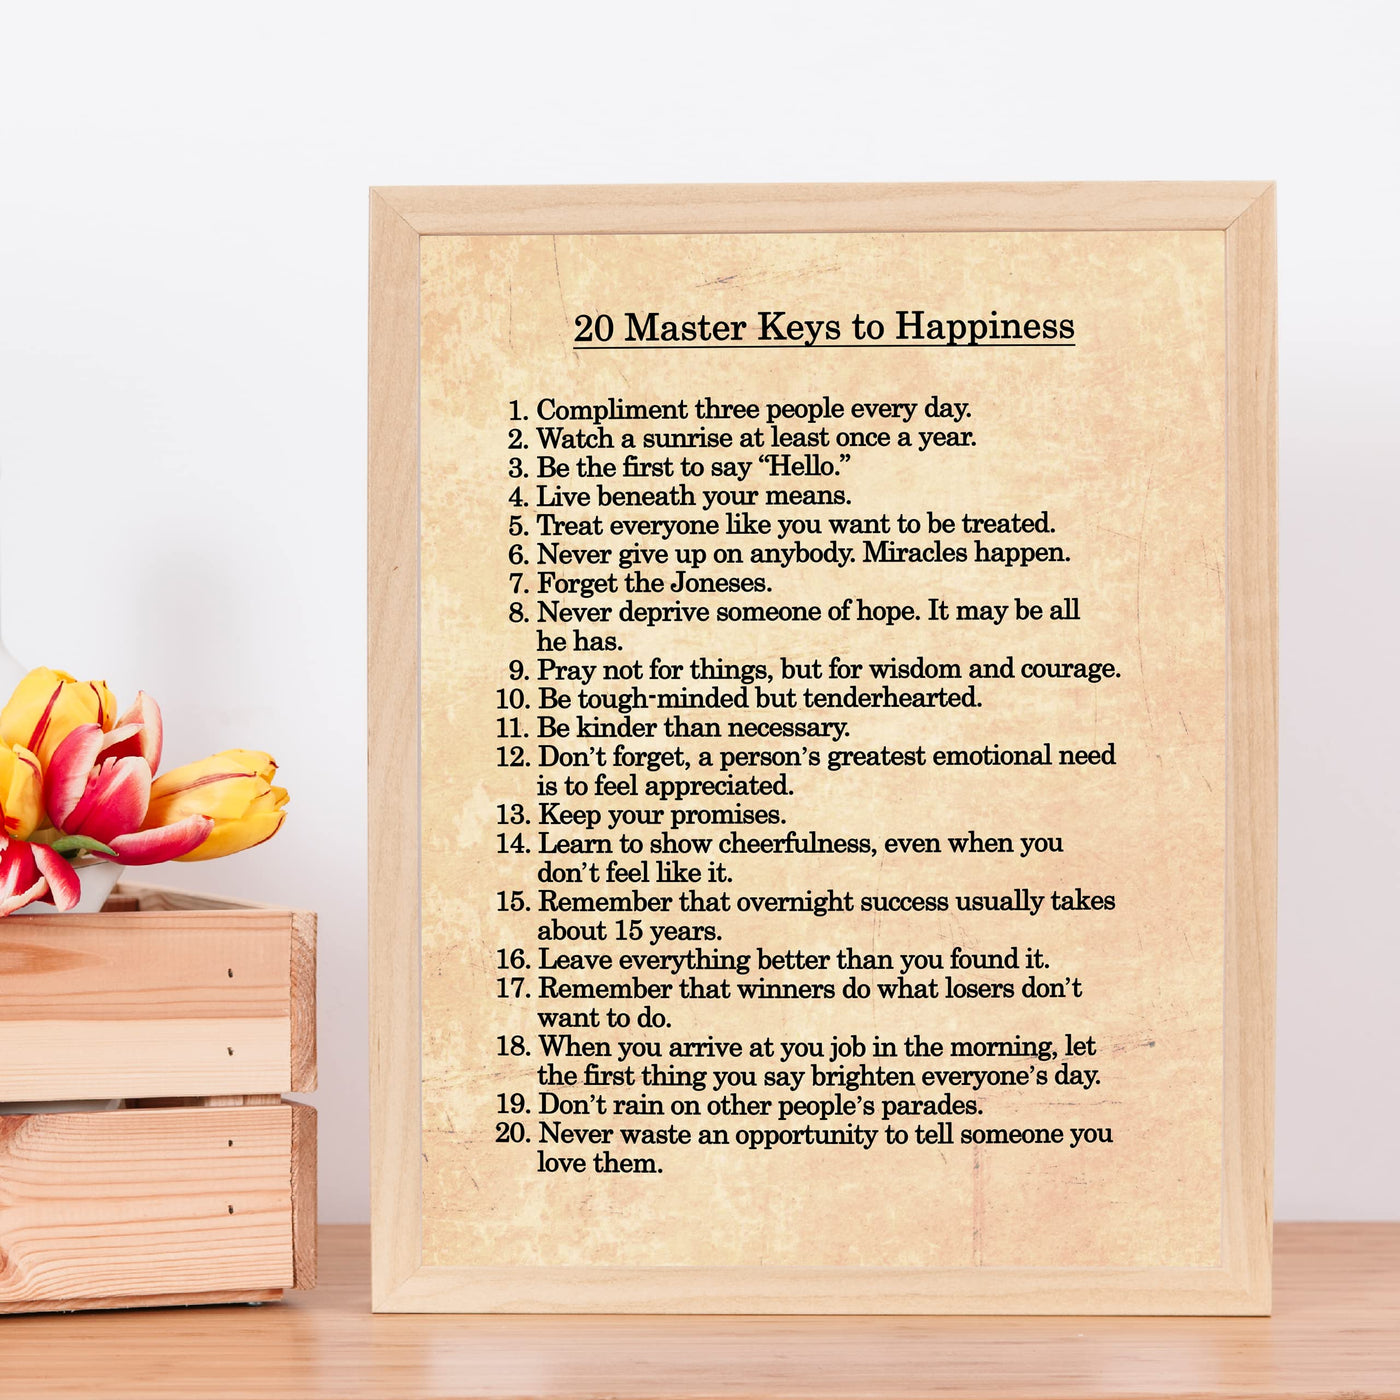 20 Master Keys to Happiness-Inspirational Wall Art Sign -11 x 14" Motivational list Print Wall Decor-Ready to Frame. Modern Typography Print for Home-Office-School Decor. Great Ways to Find Joy!